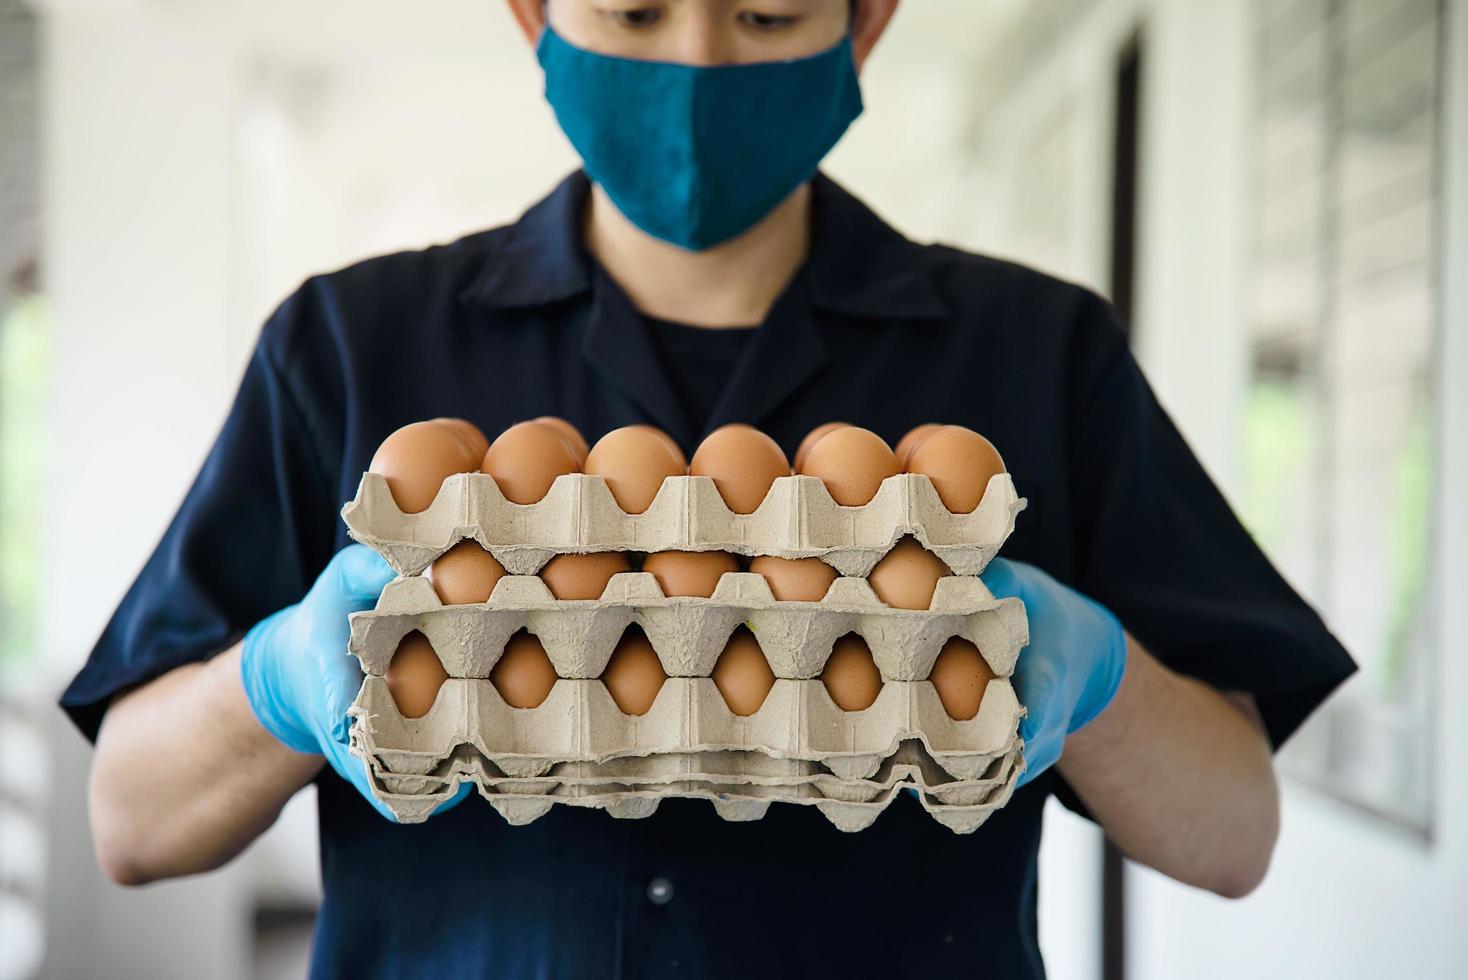 A man carry 3 layers eggs tray for stay safe at home putting sanitary glove during corona virus COVID-19 spreading - people keeping food in COVID-19 viral spread period concept. photo